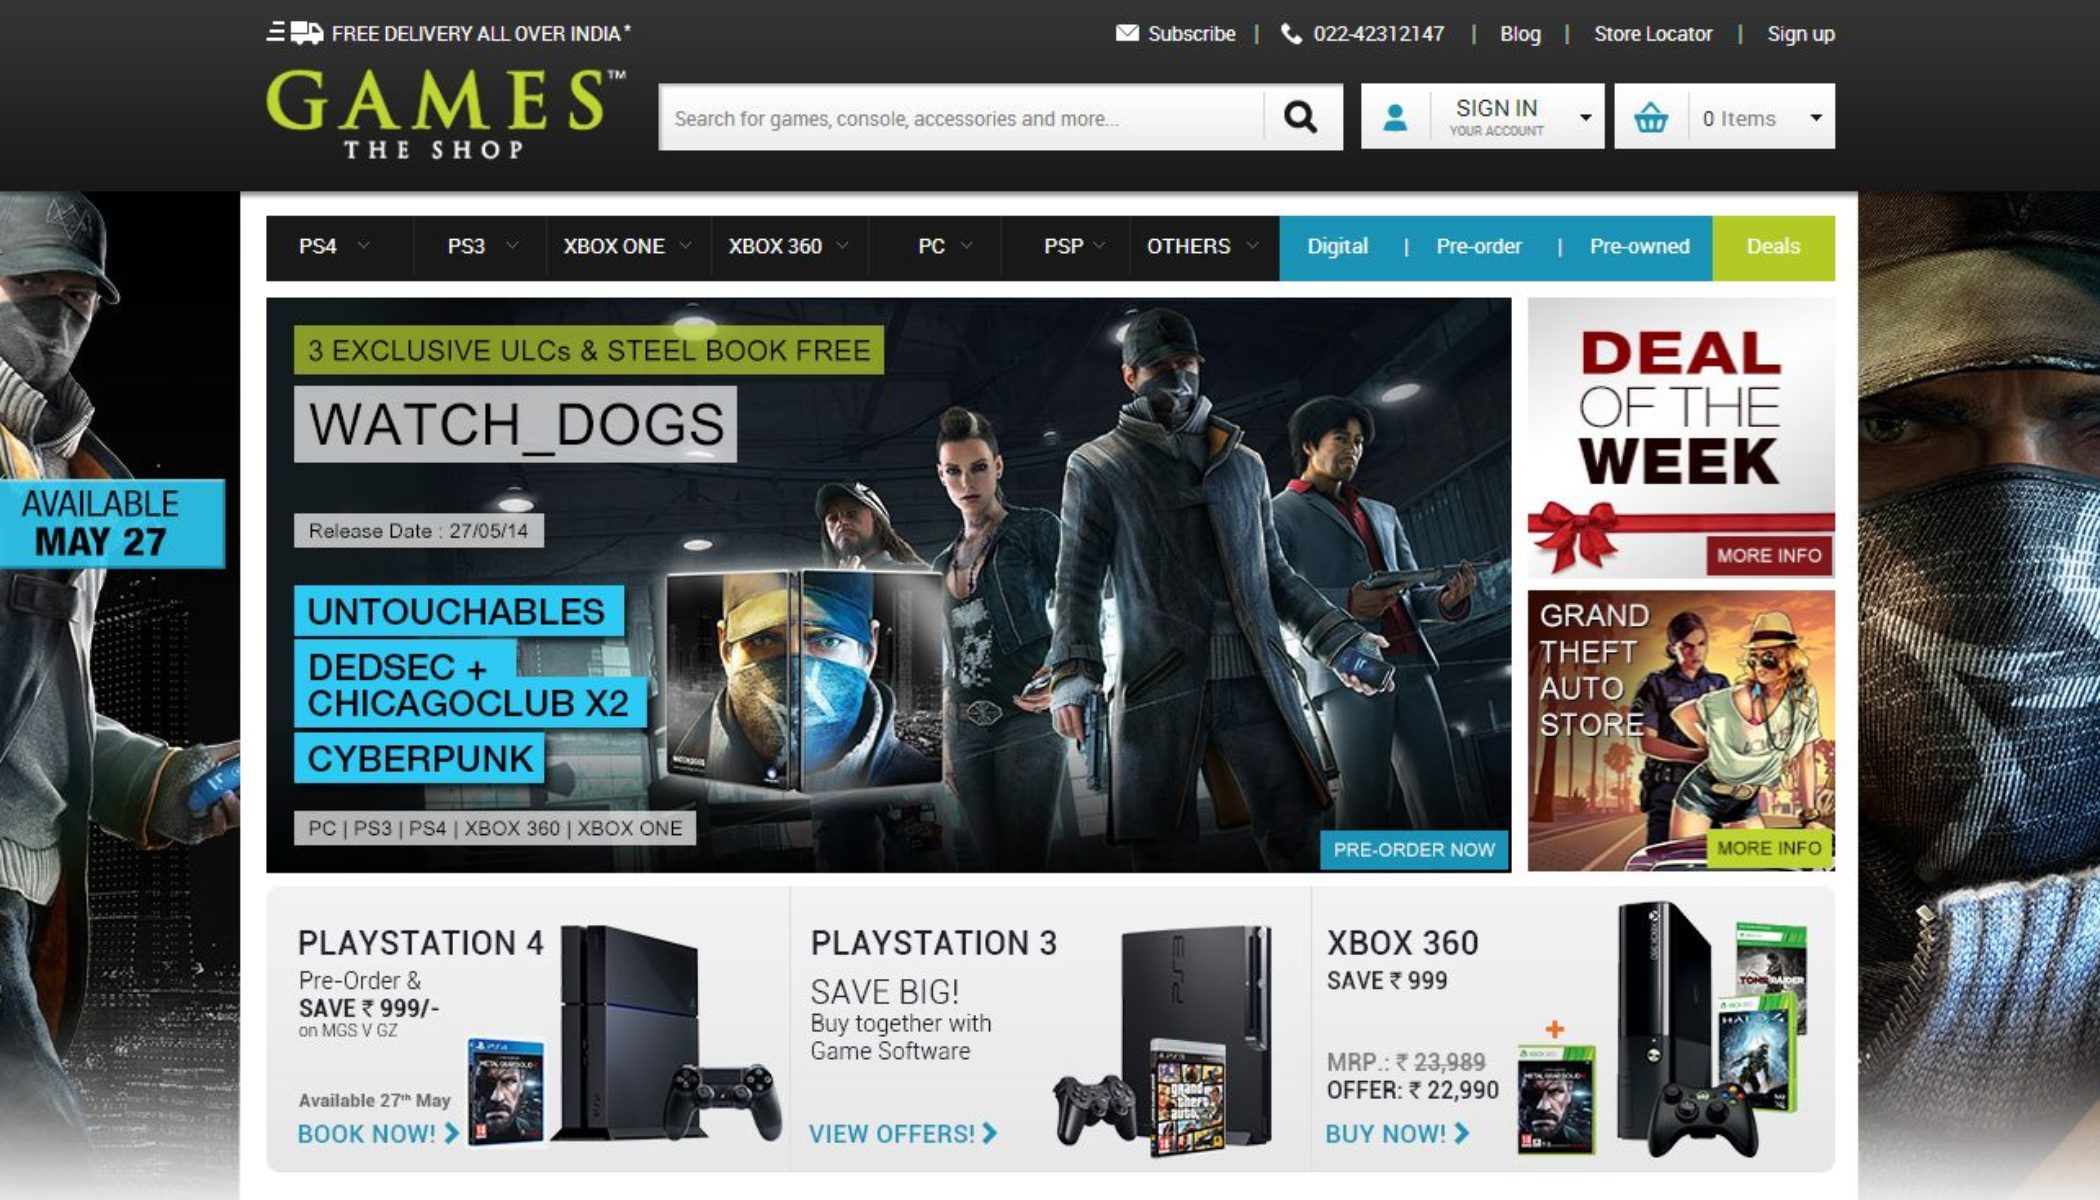 game store website